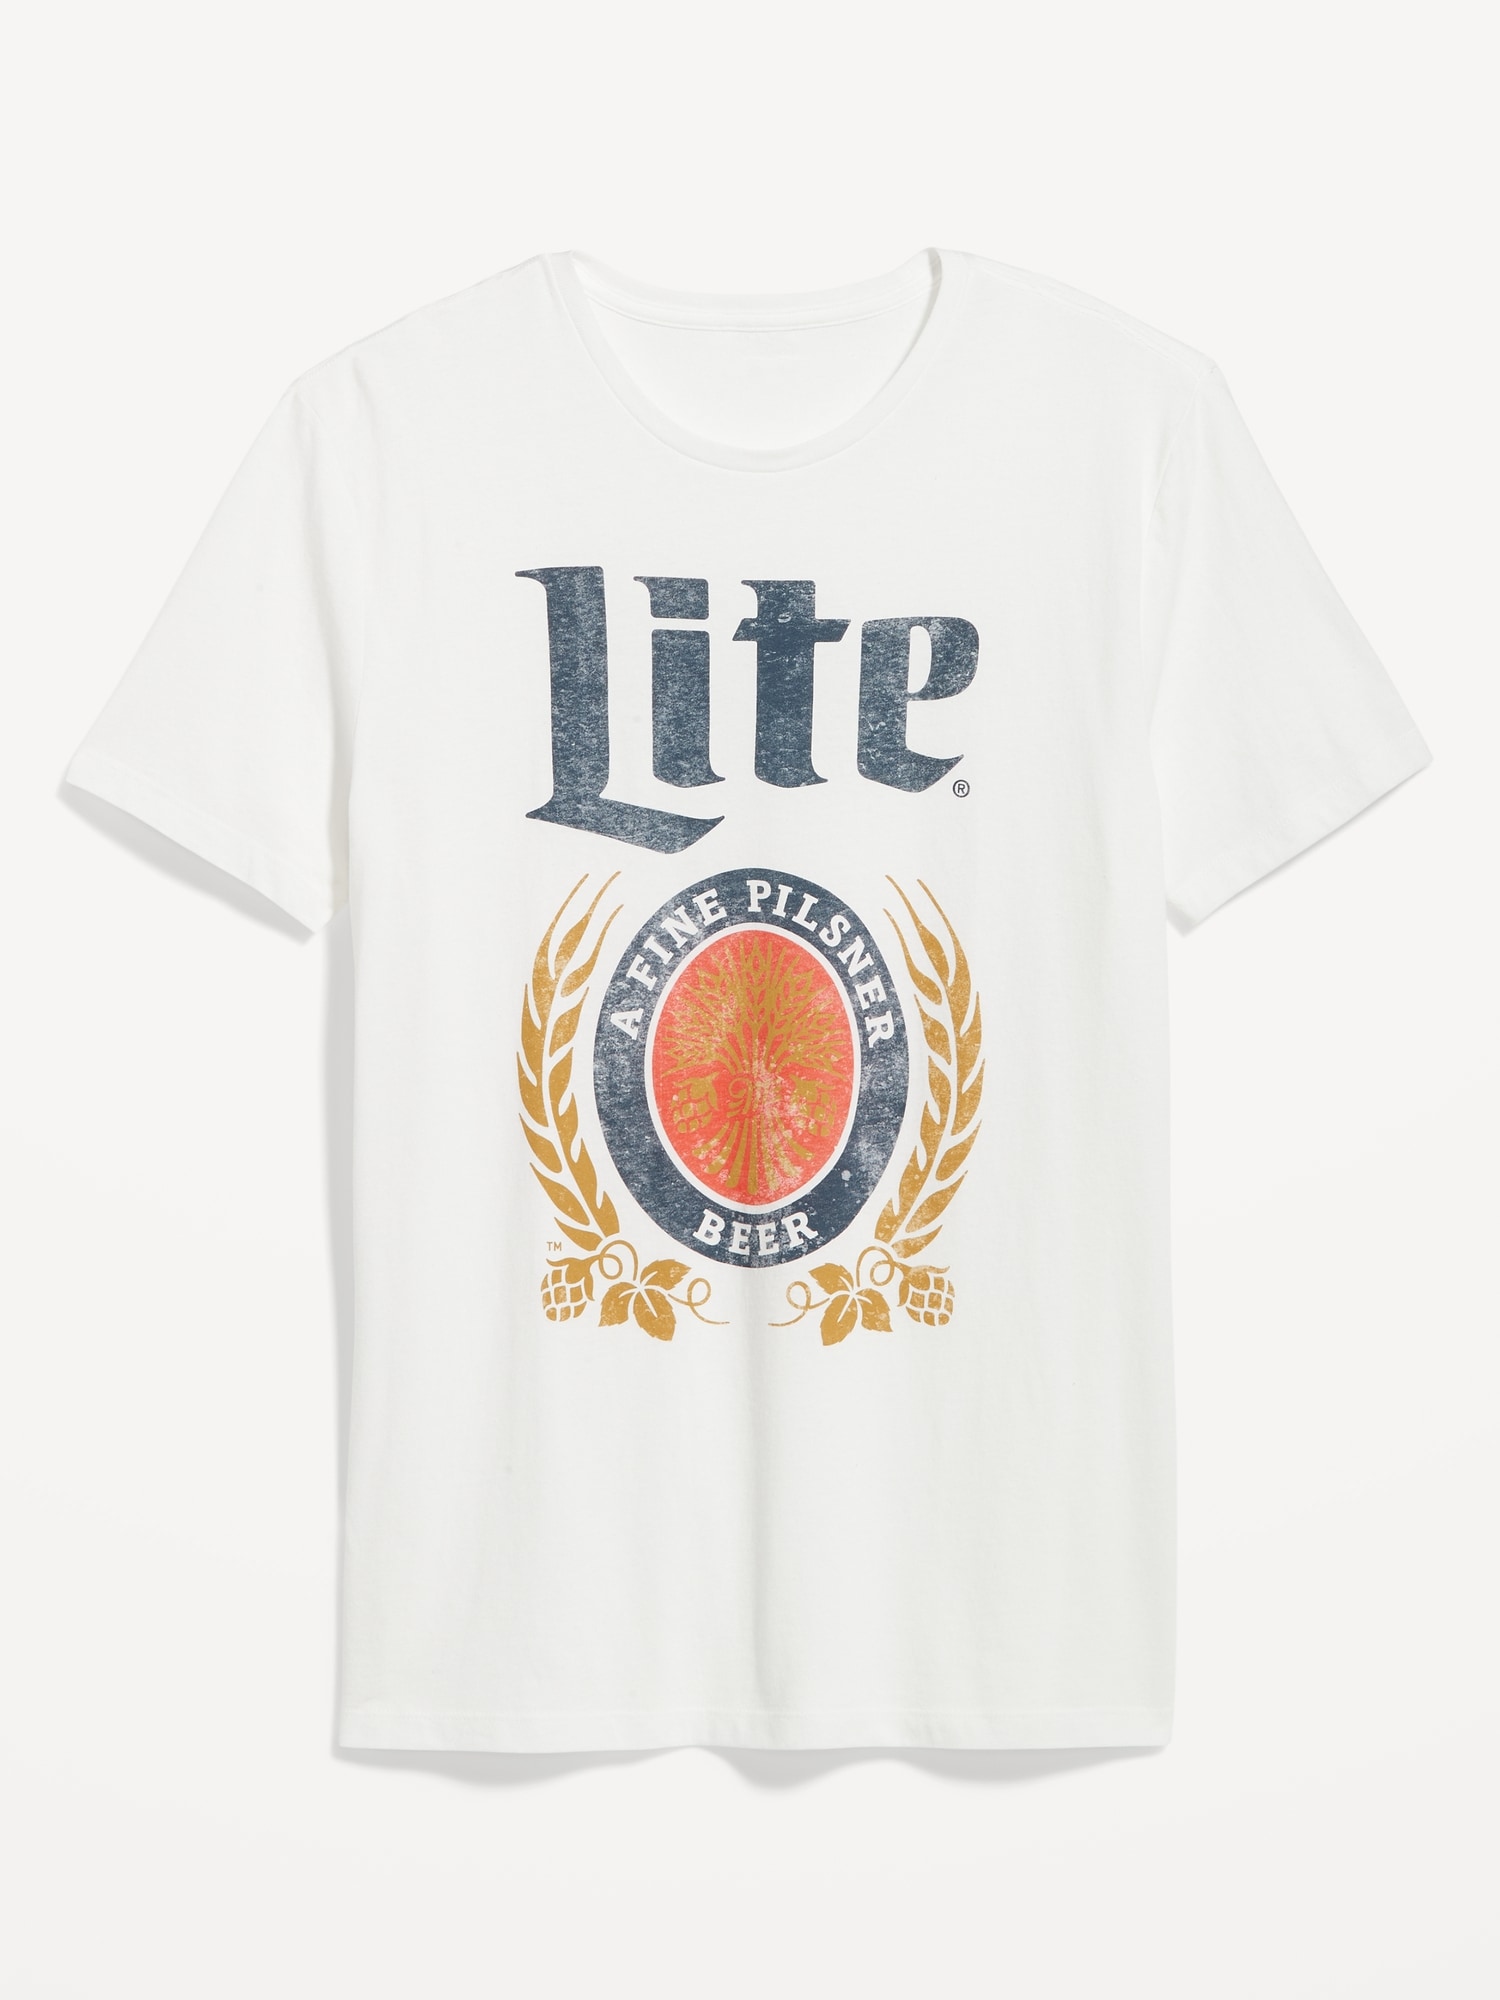 G & G Outfitters Miller Lite Unisex Can Pocket T-Shirt 3X